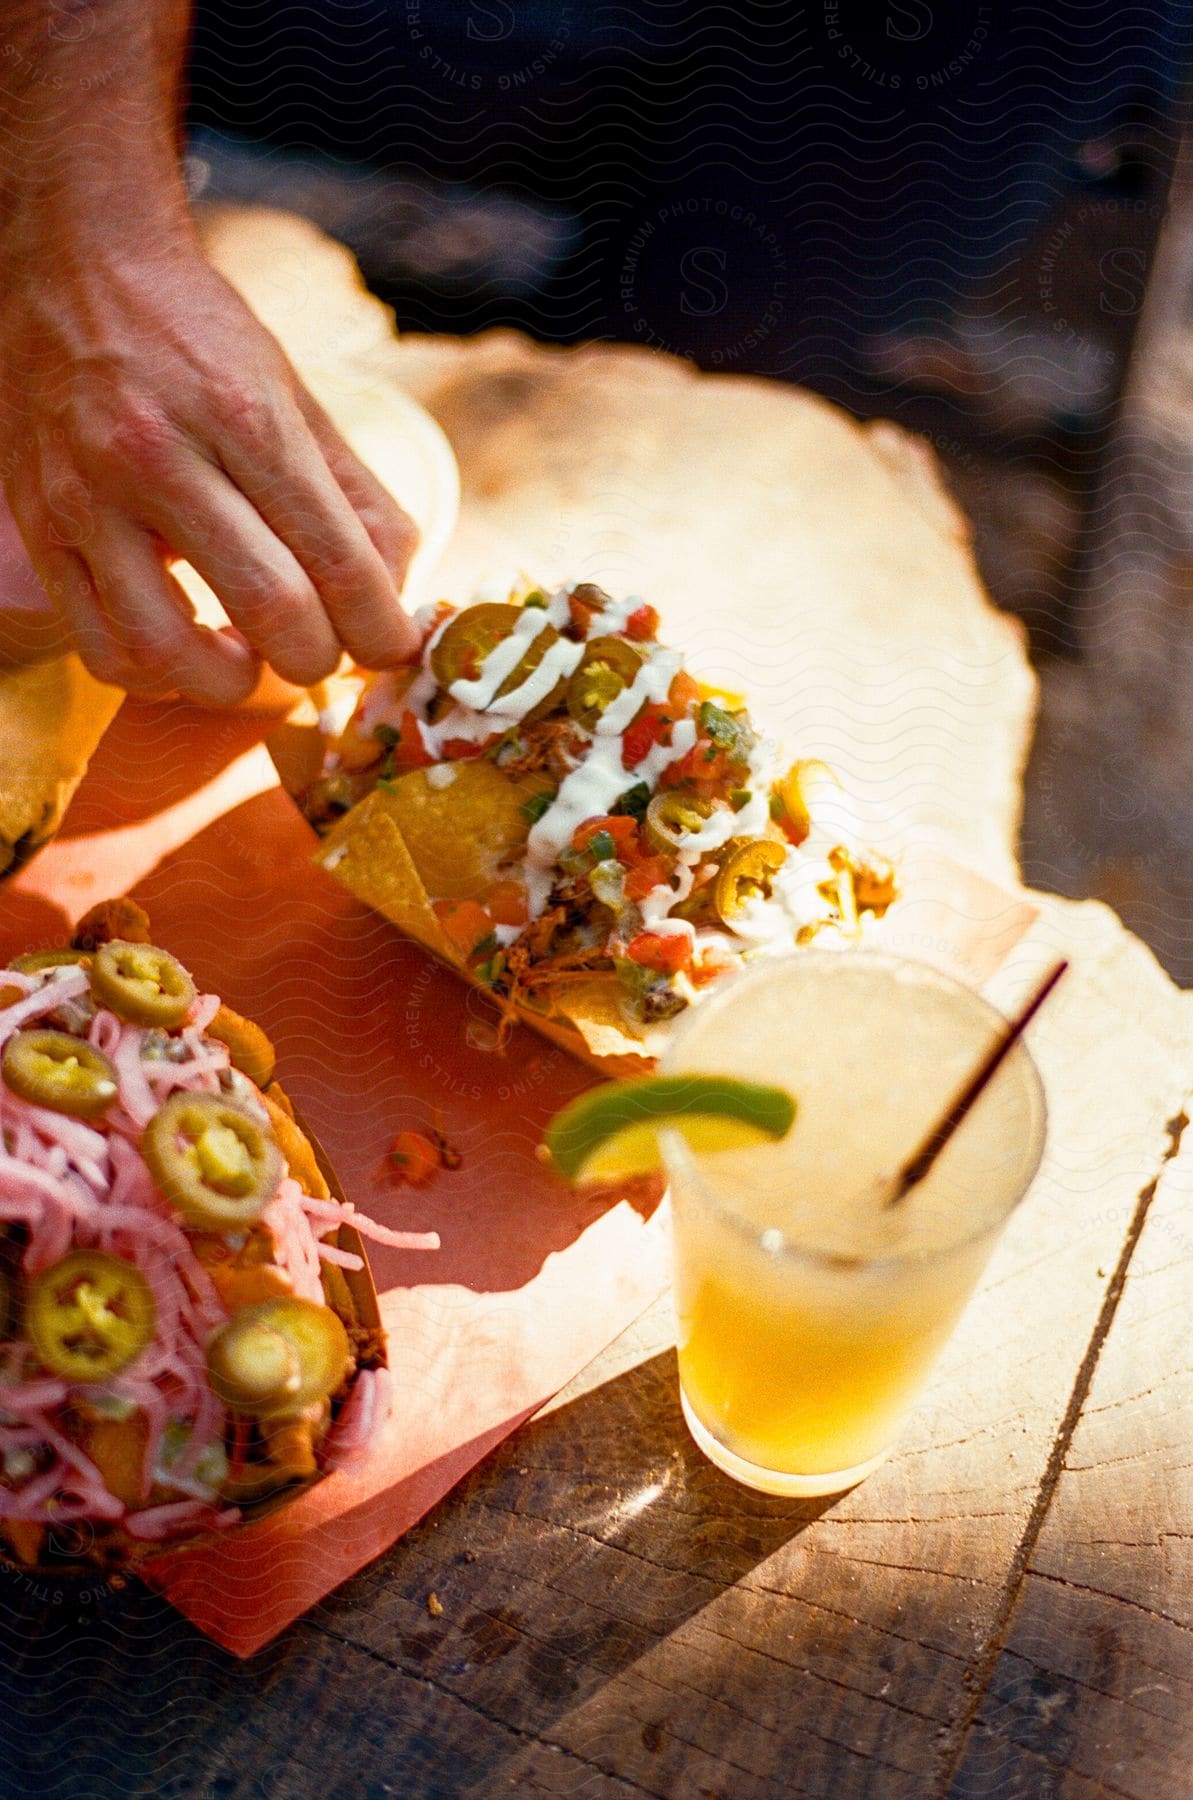 Fancy nachos covered in jalapenos on a wooden stump accompanied by an alcoholic drink garnished with lime.